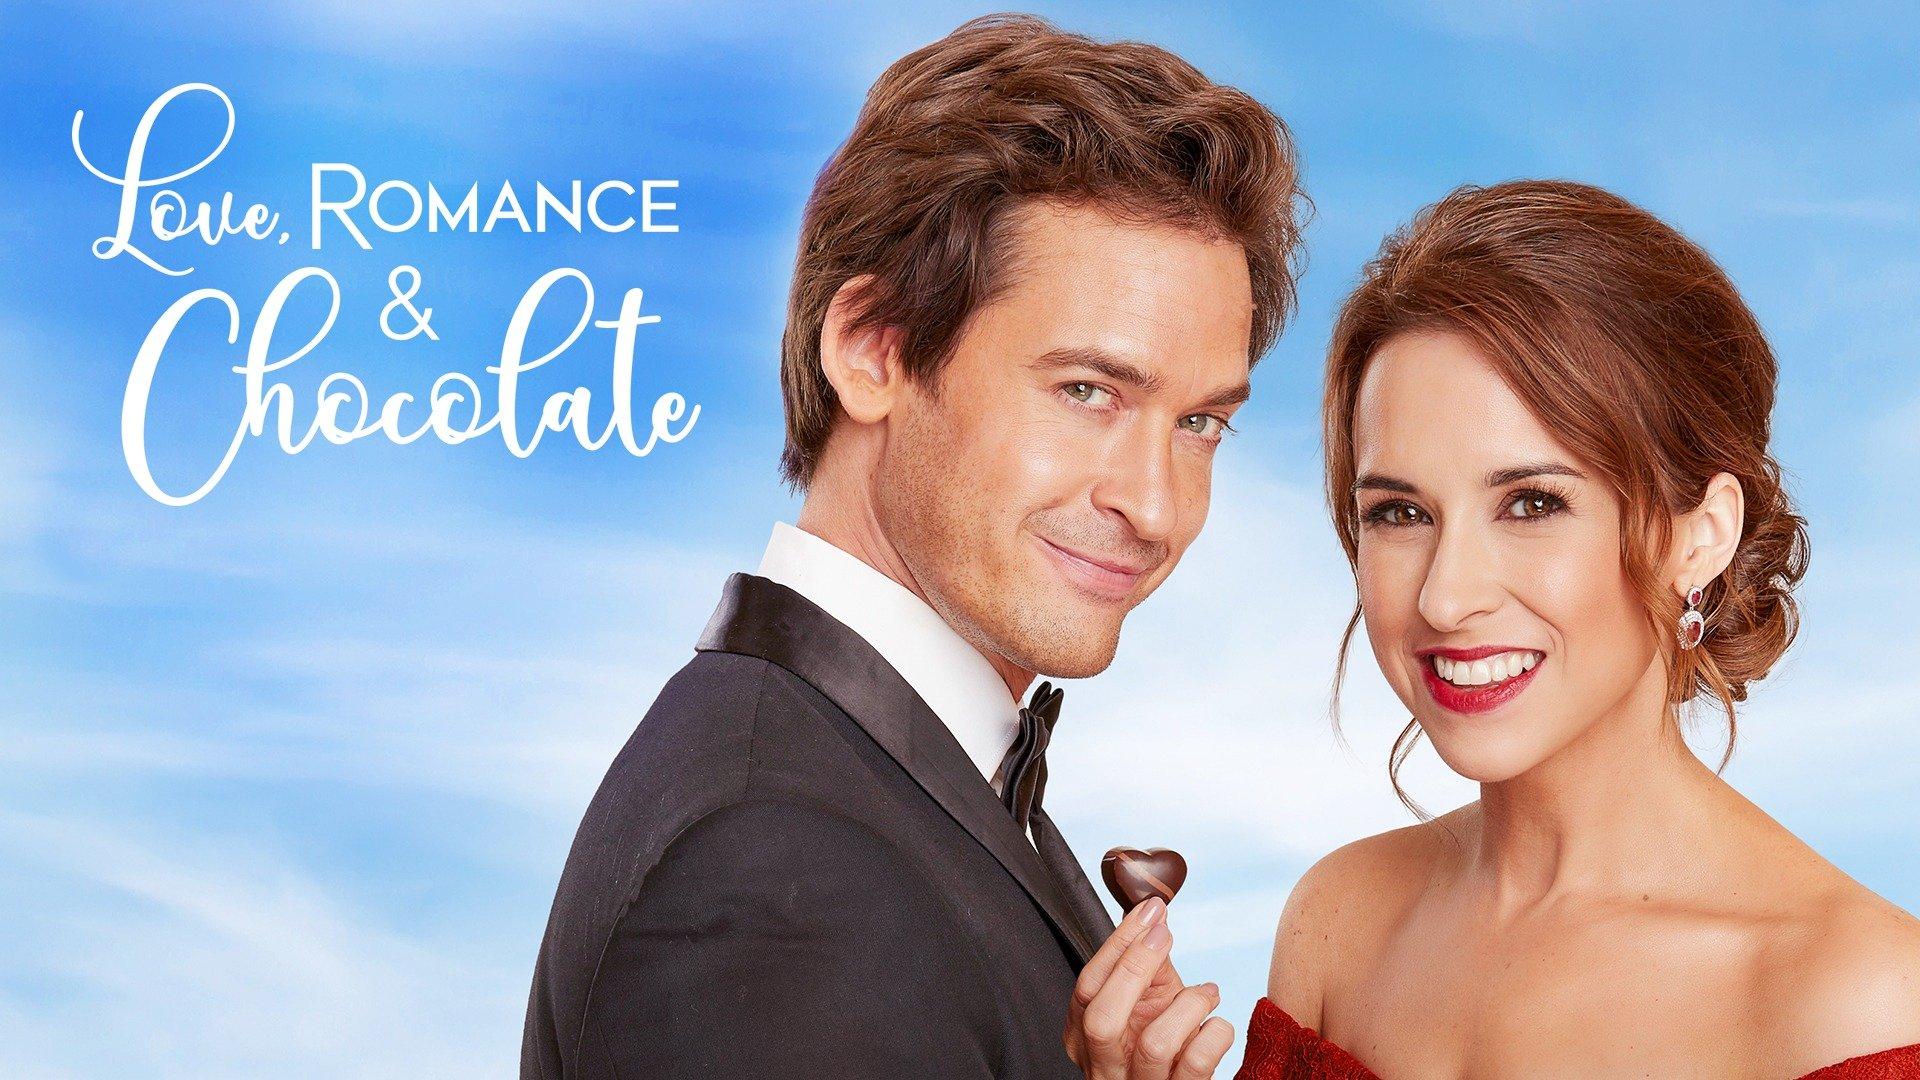 Romance with Chocolate - Hidden Items for apple download